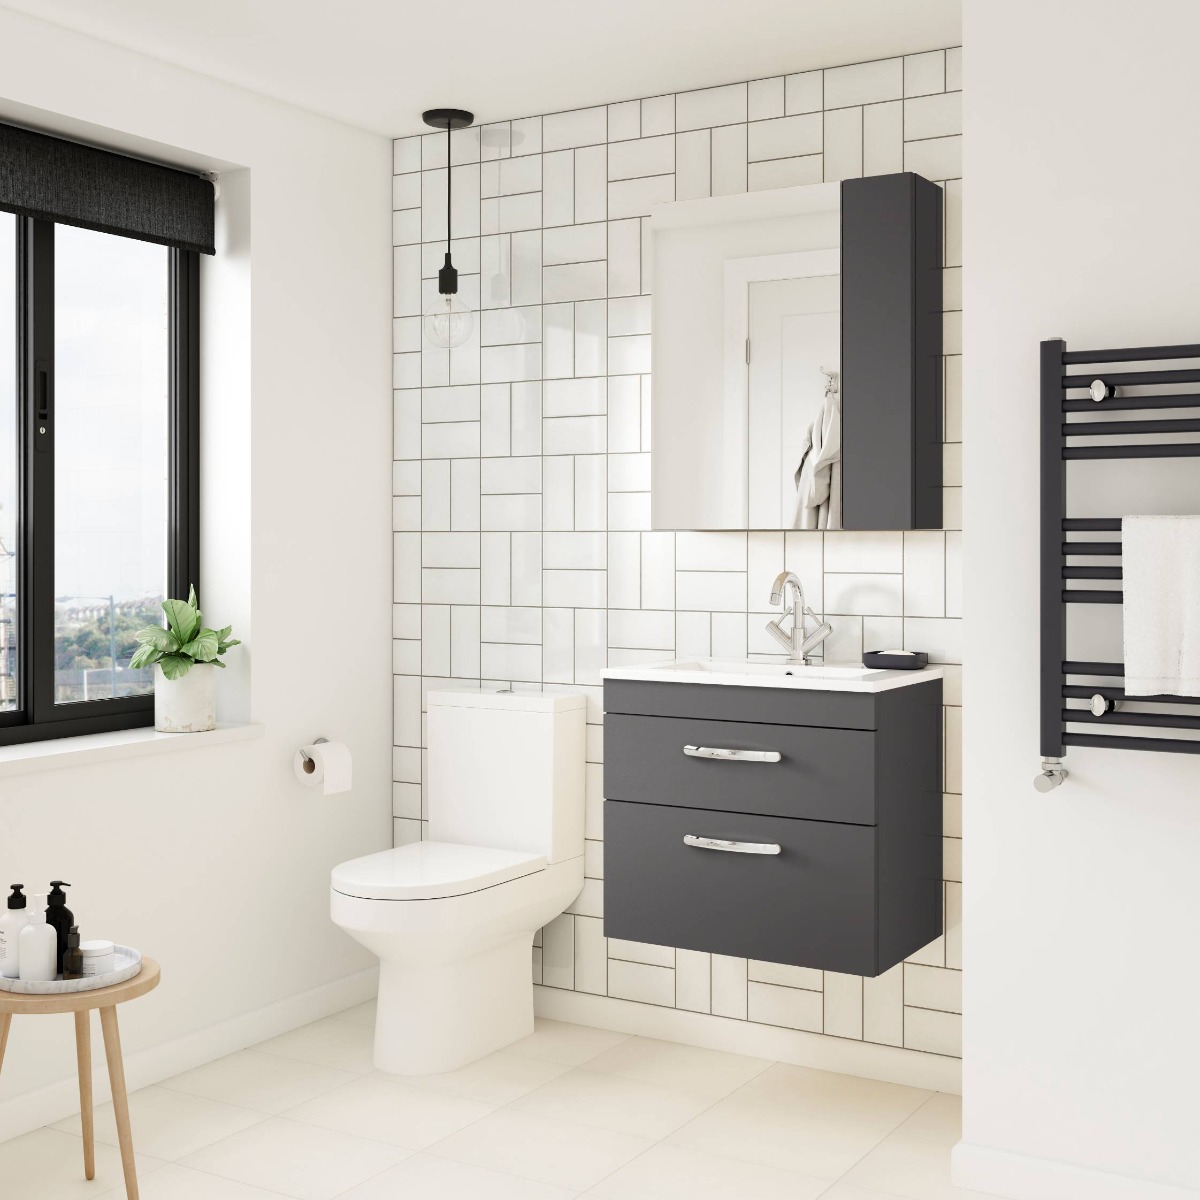 black and white bathroom with white tiles and black furniture